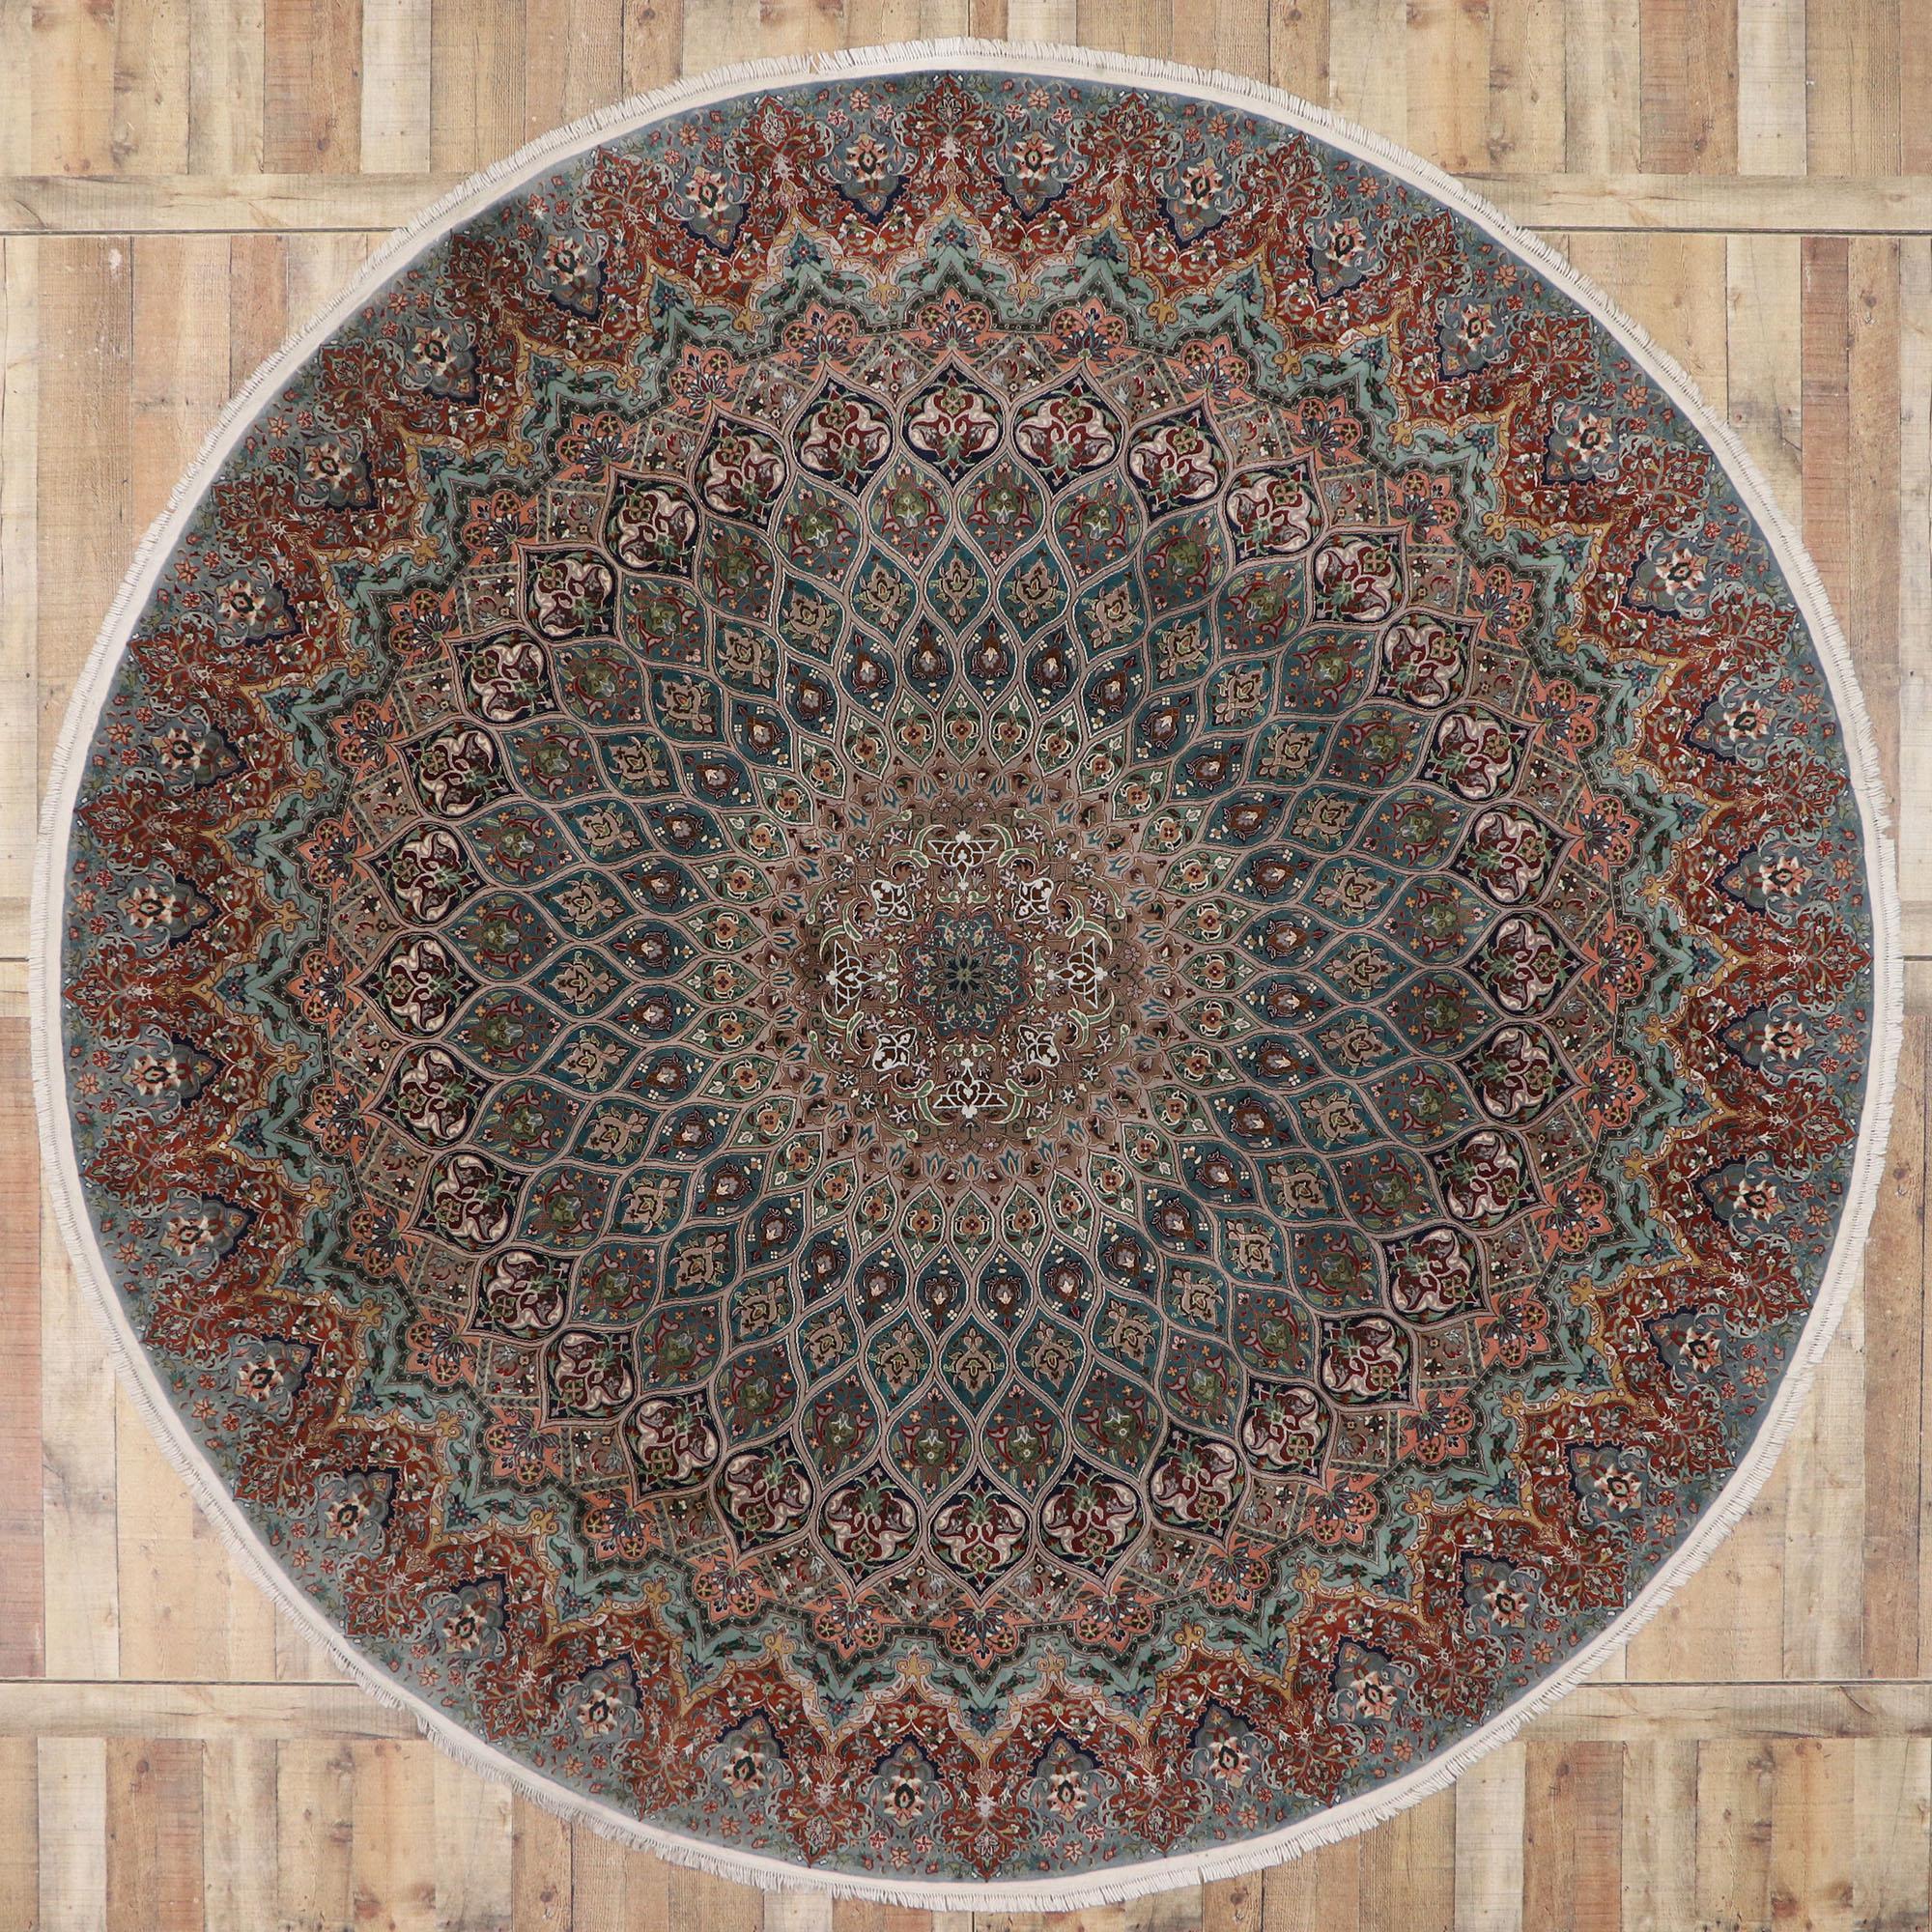 77558, vintage Persian Tabriz round Mandala rug with Art Nouveau Rococo style. With ornate details and well-balanced symmetry combined with a dreamy color palette, this hand knotted wool and silk vintage Persian Tabriz round rug beautifully embodies